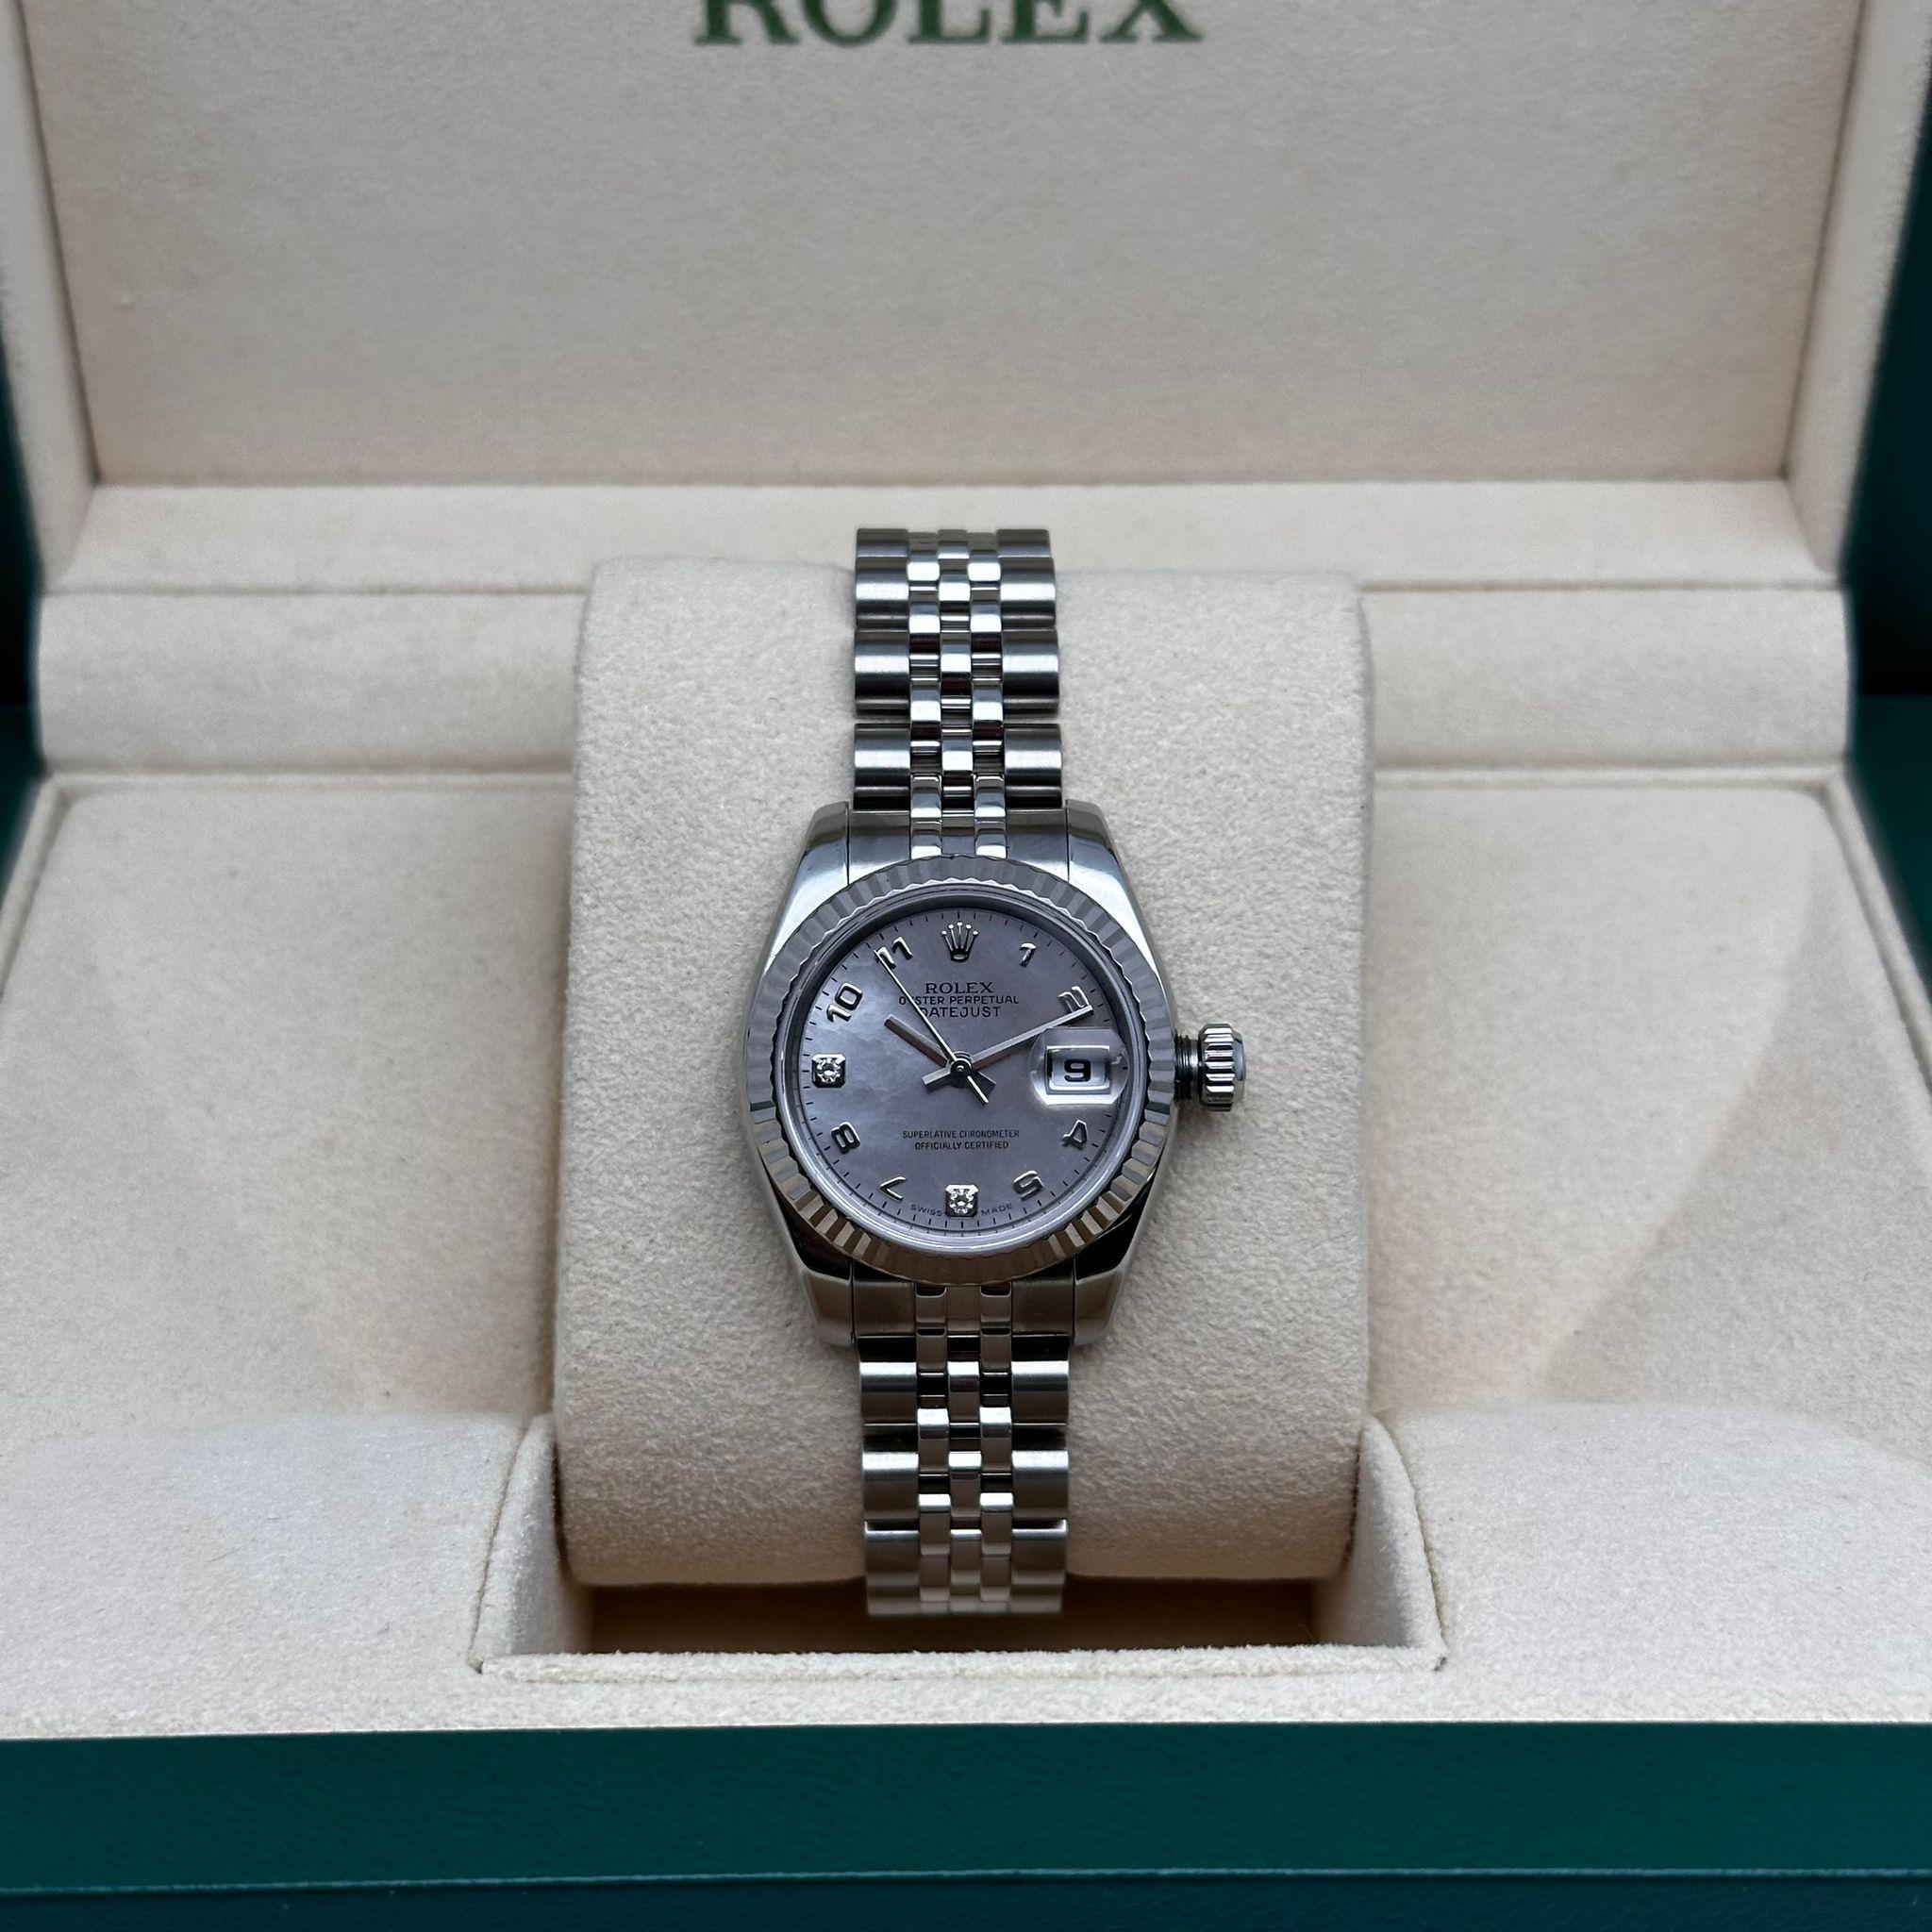 Pre-owned. Rare Dial. Good condition. Comes with the original box.